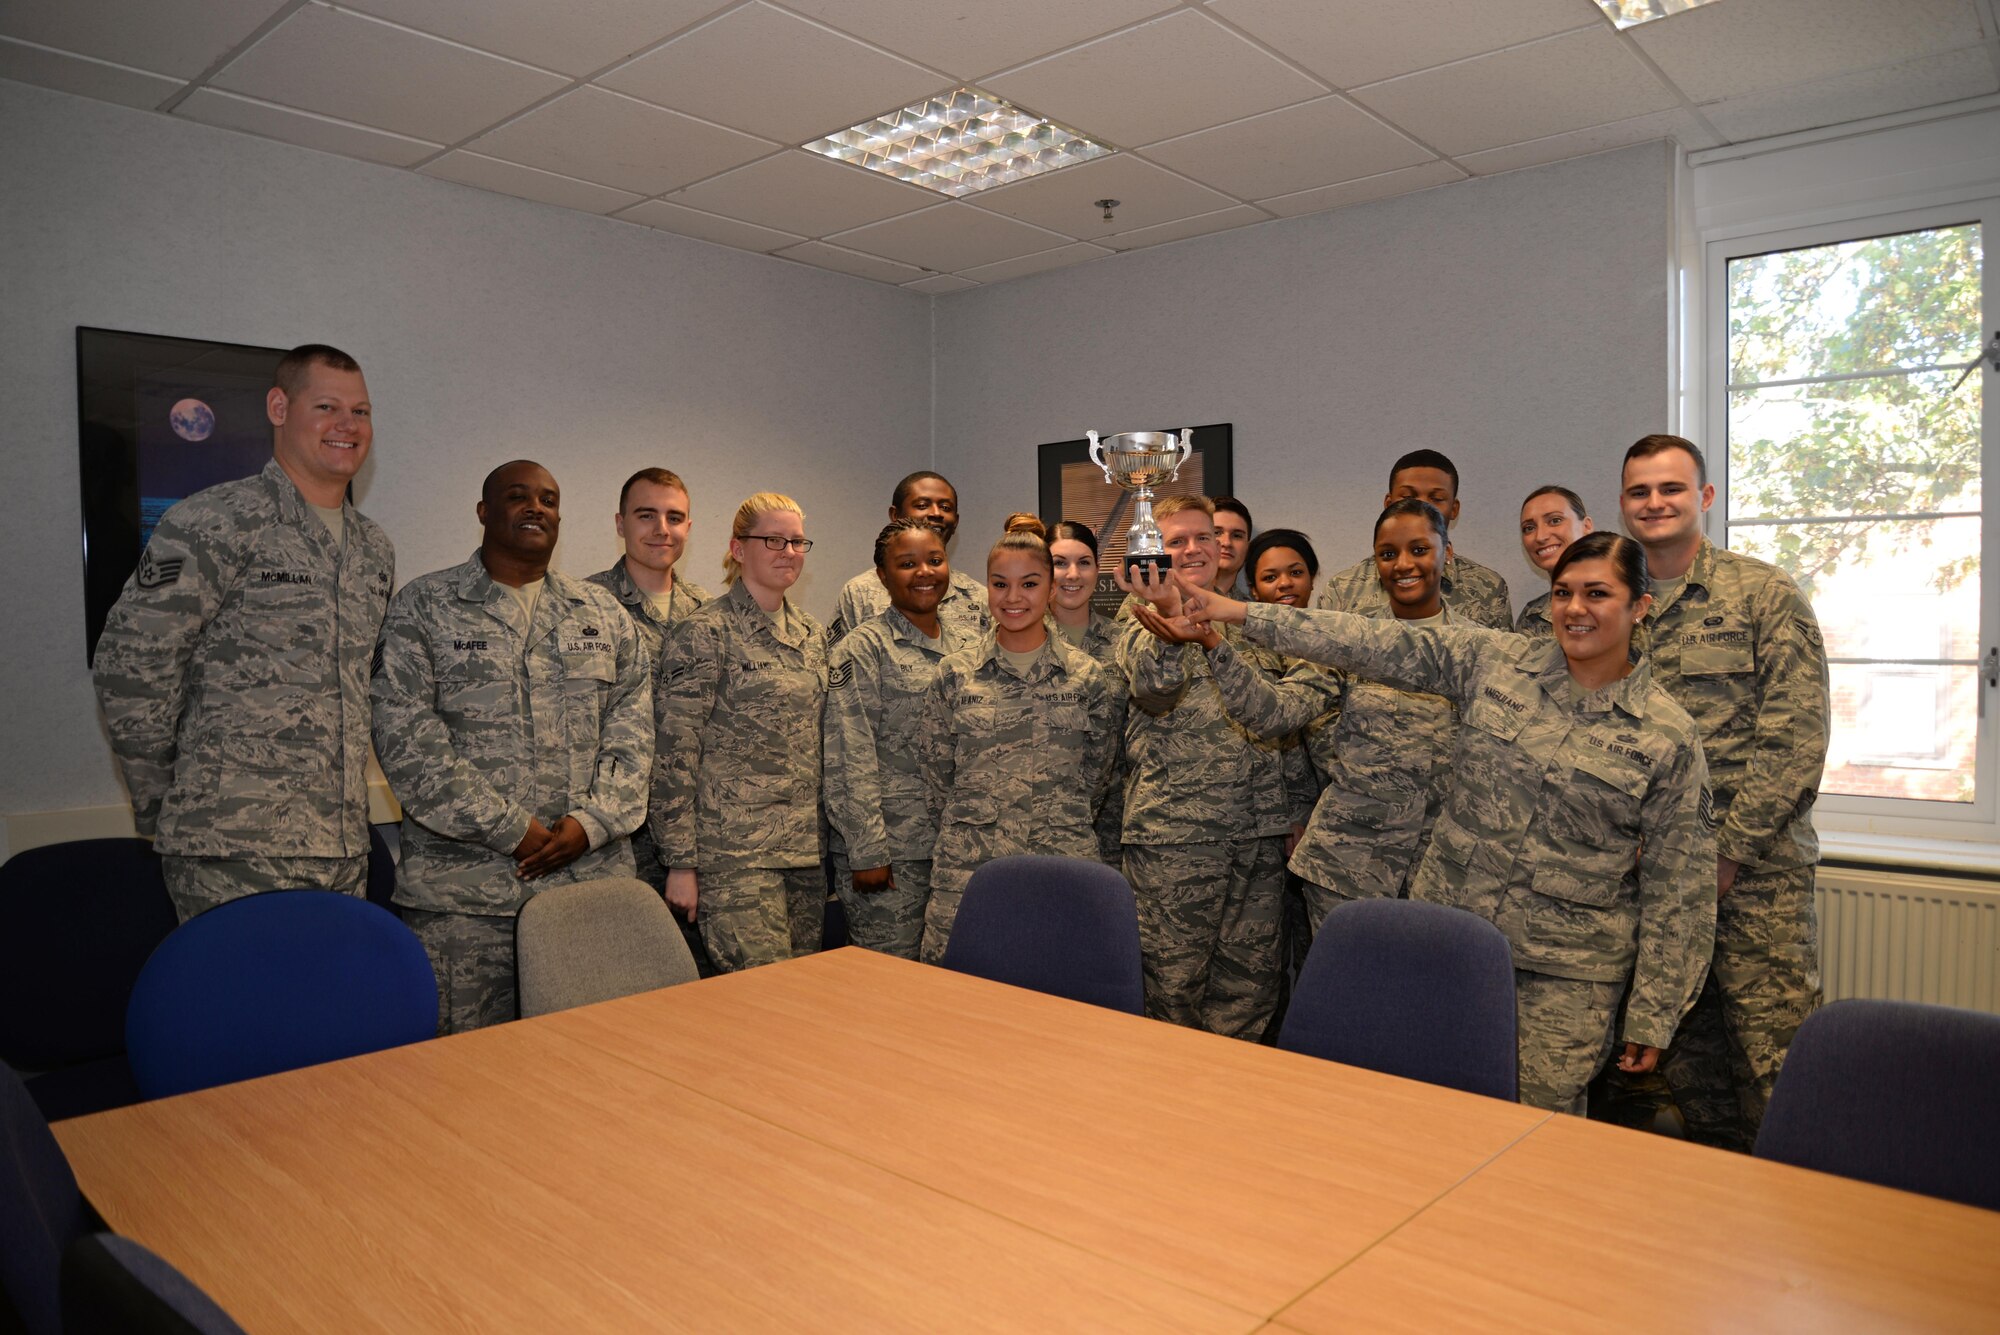 U.S. Air Force Airmen from the 100th Force Support Squadron Manpower and Organization office, pose for a photograph with their Innovation of the Quarter award, Oct. 4, 2016, on RAF Mildenhall, England. U.S. Air Force Tech. Sgt. Laura Anguiano, second from right, 100th FSS Manpower and Organization section chief, led the team to review more than 2,000 enlisted performance reports in fewer than six days. This process normally takes up to 30 days, but her innovative rapid improvement event slashed the processing time and saved 45 man-hours per month in the review process. (U.S. Air Force photo by Senior Airman Christine Halan)